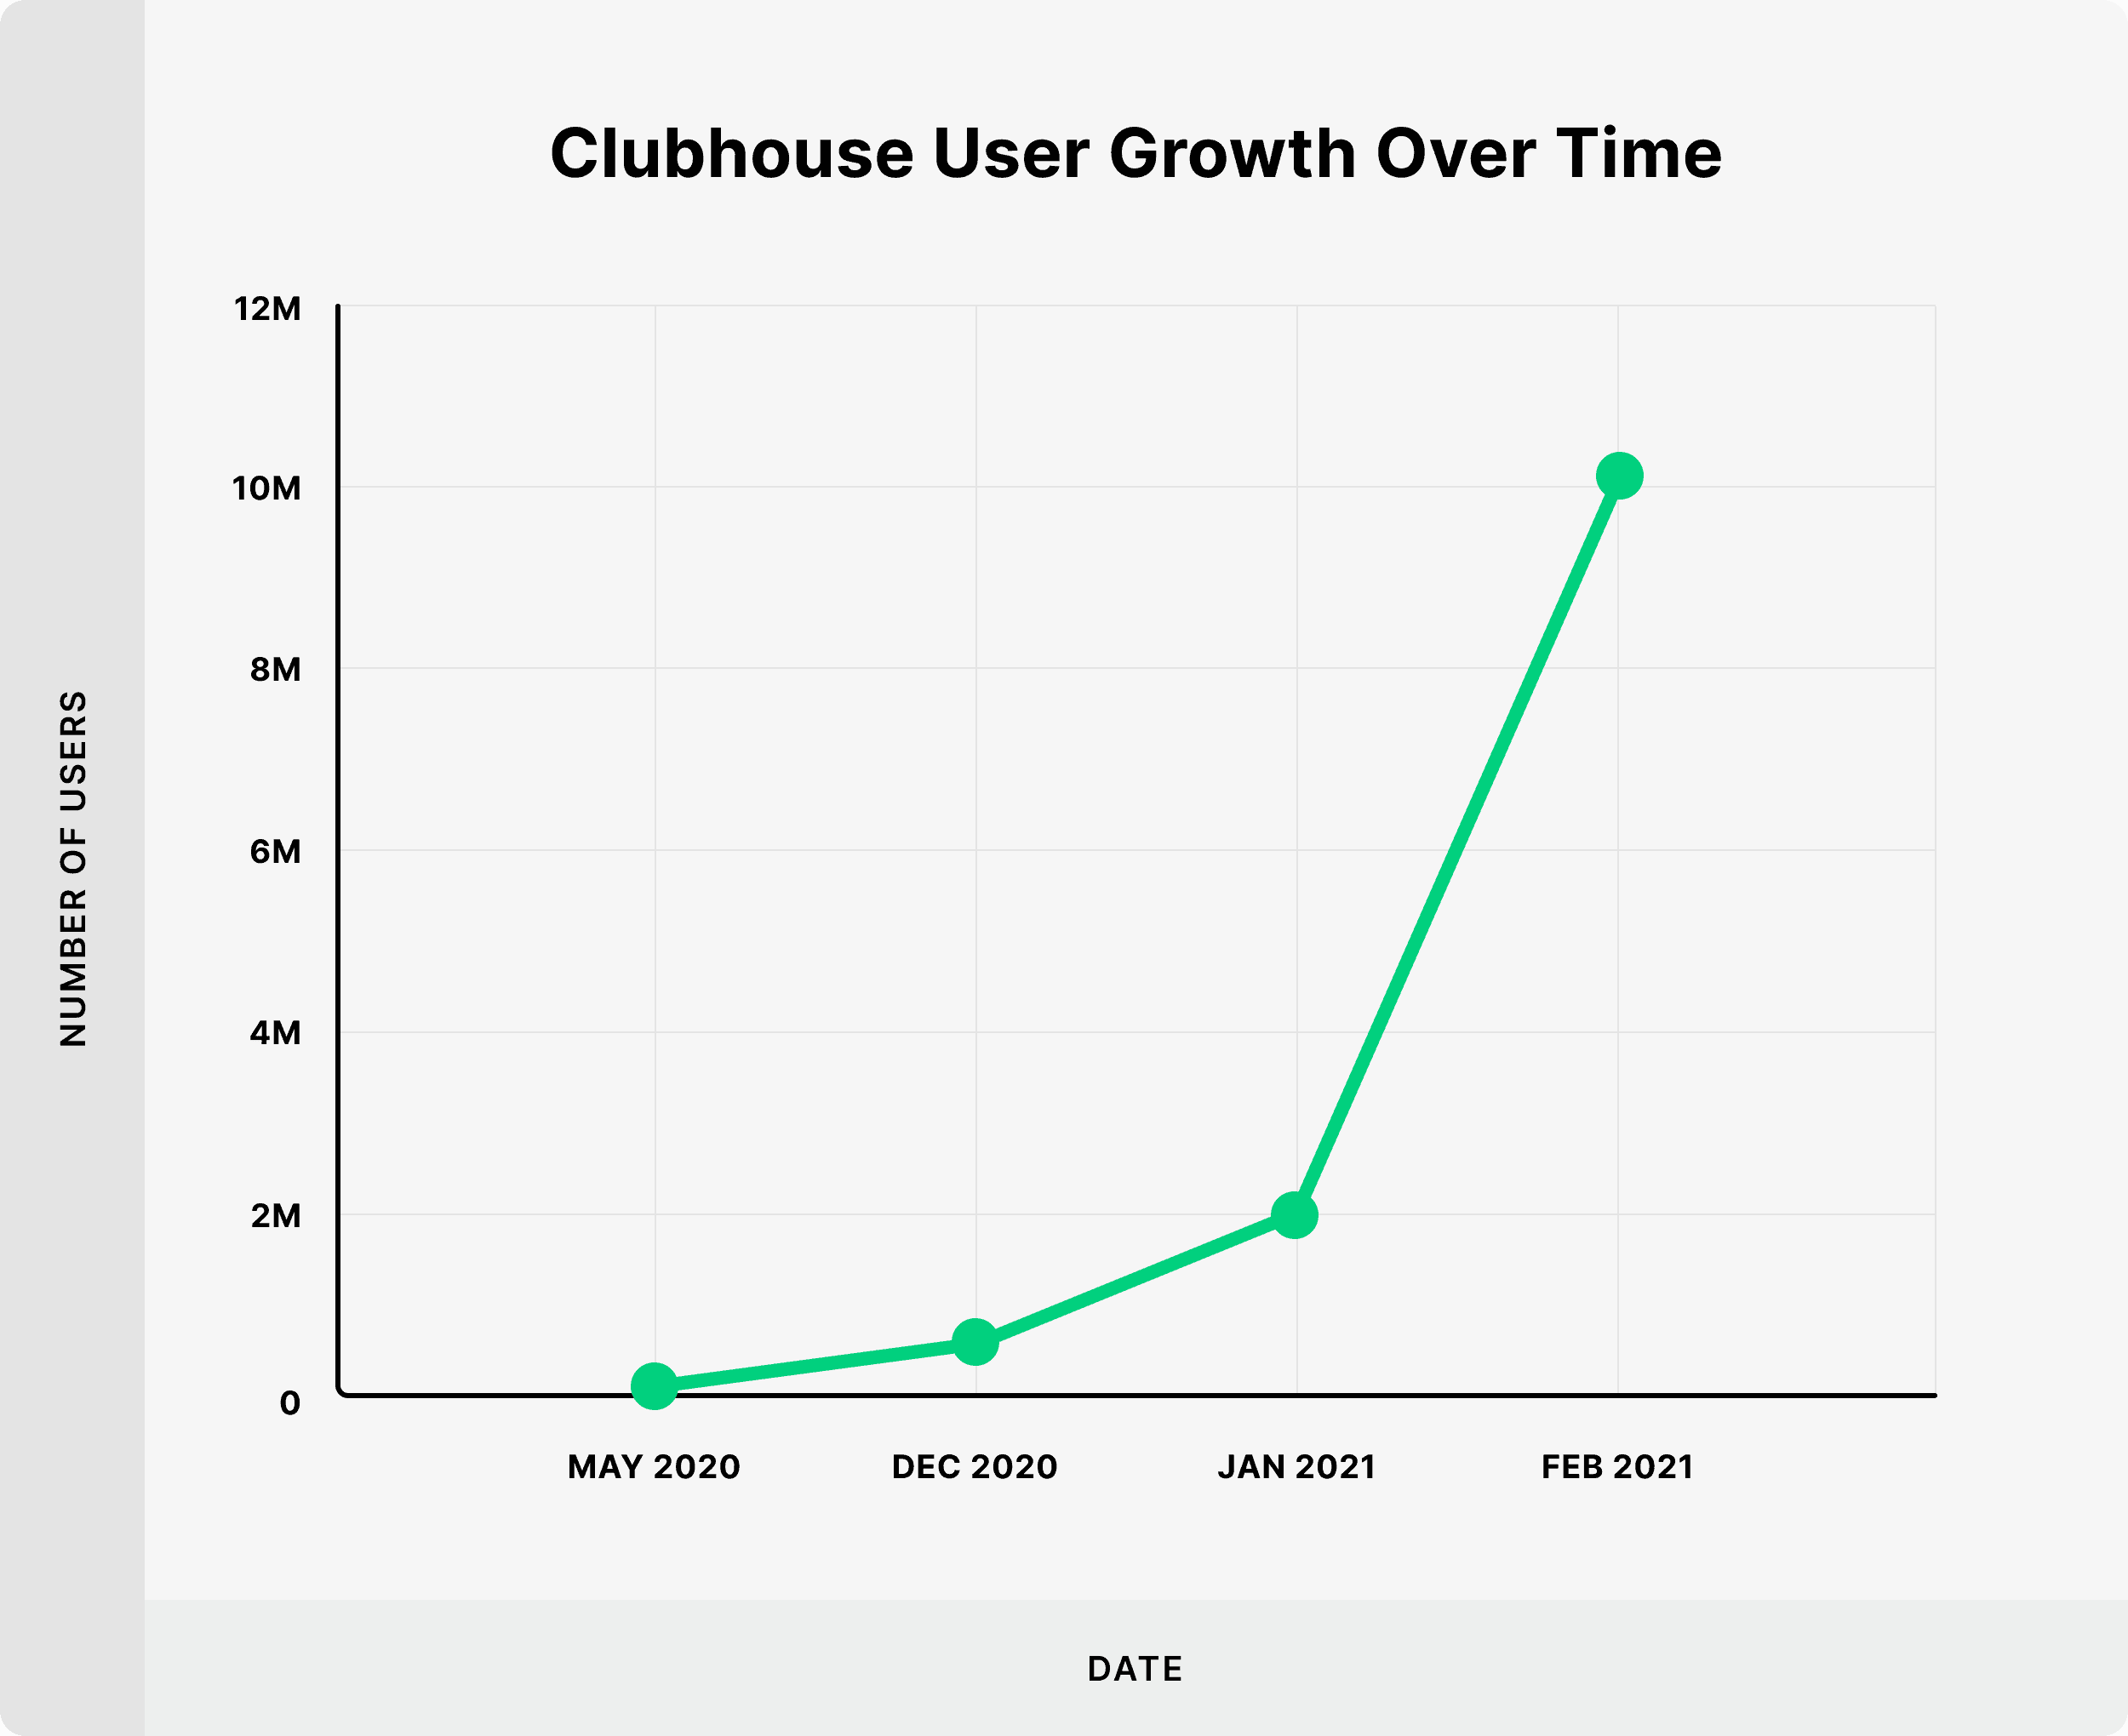 Clubhouse User Growth Over Time